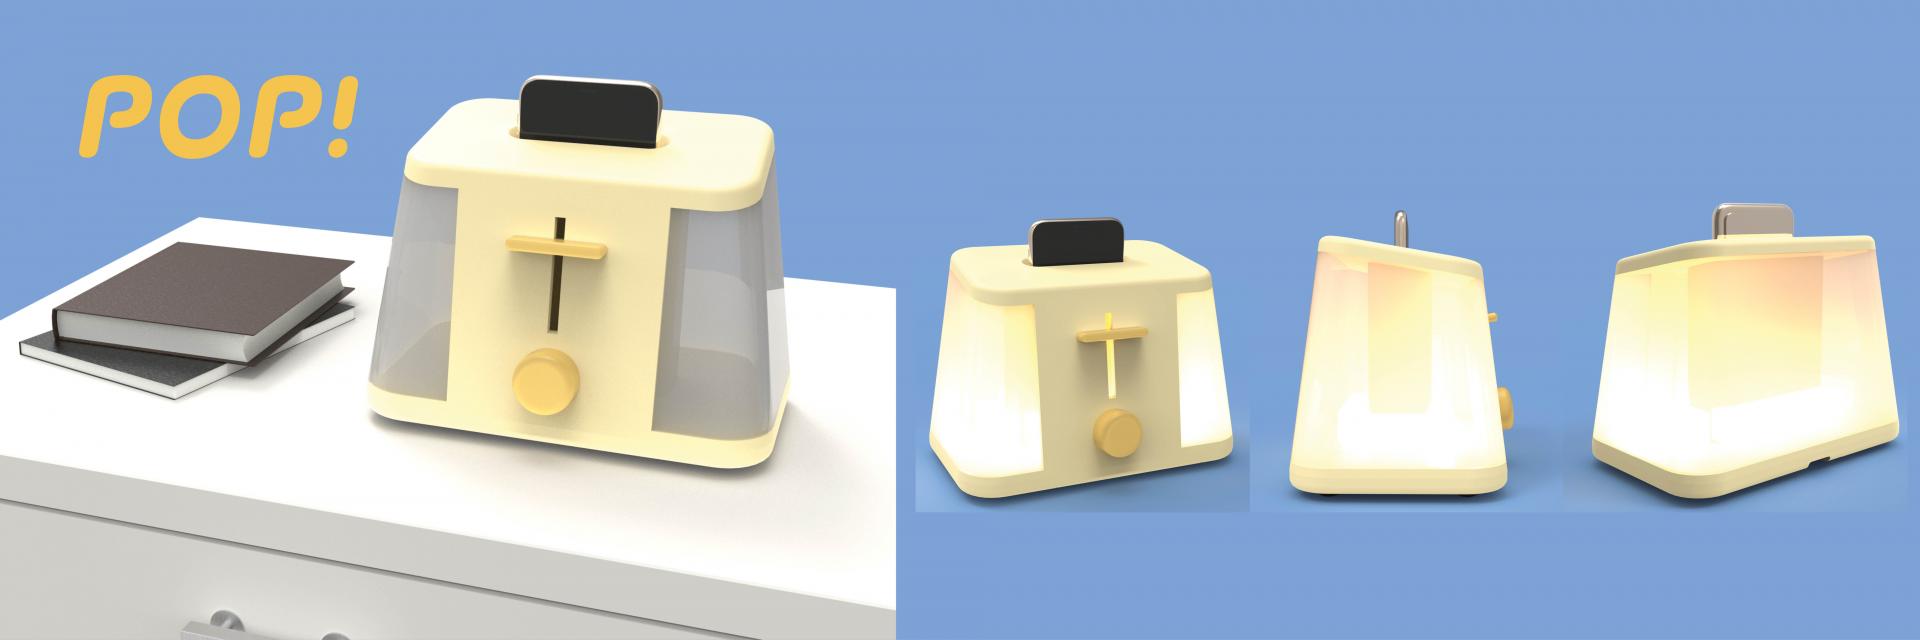 Renders of a toaster